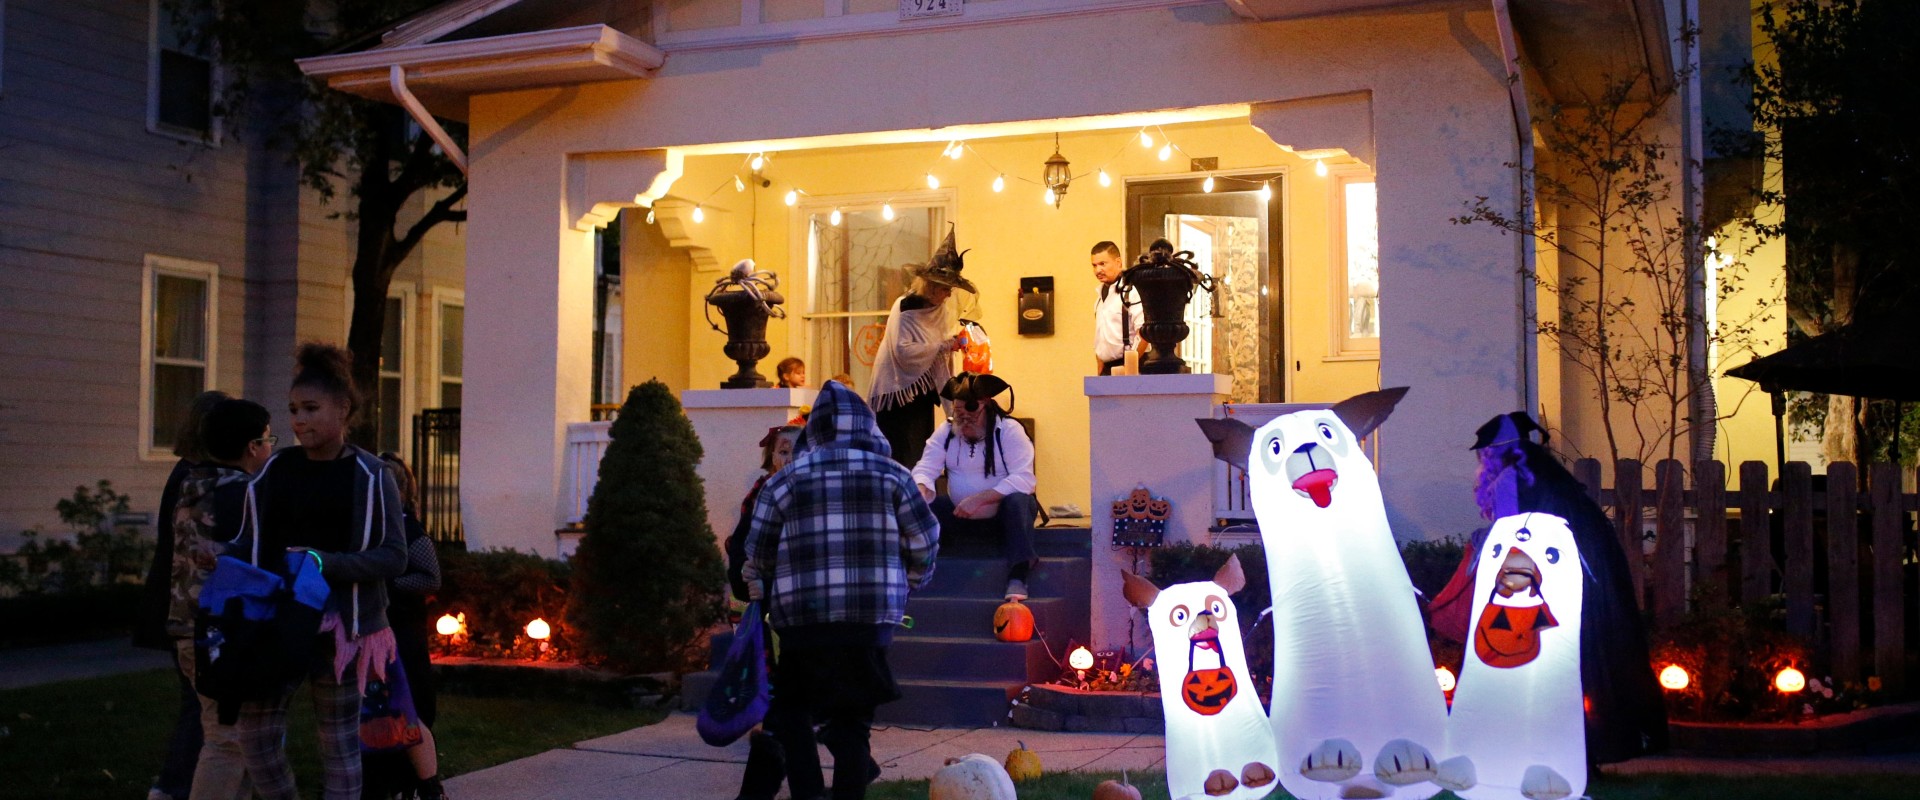 The Ultimate Guide to Halloween Fun in Oklahoma City